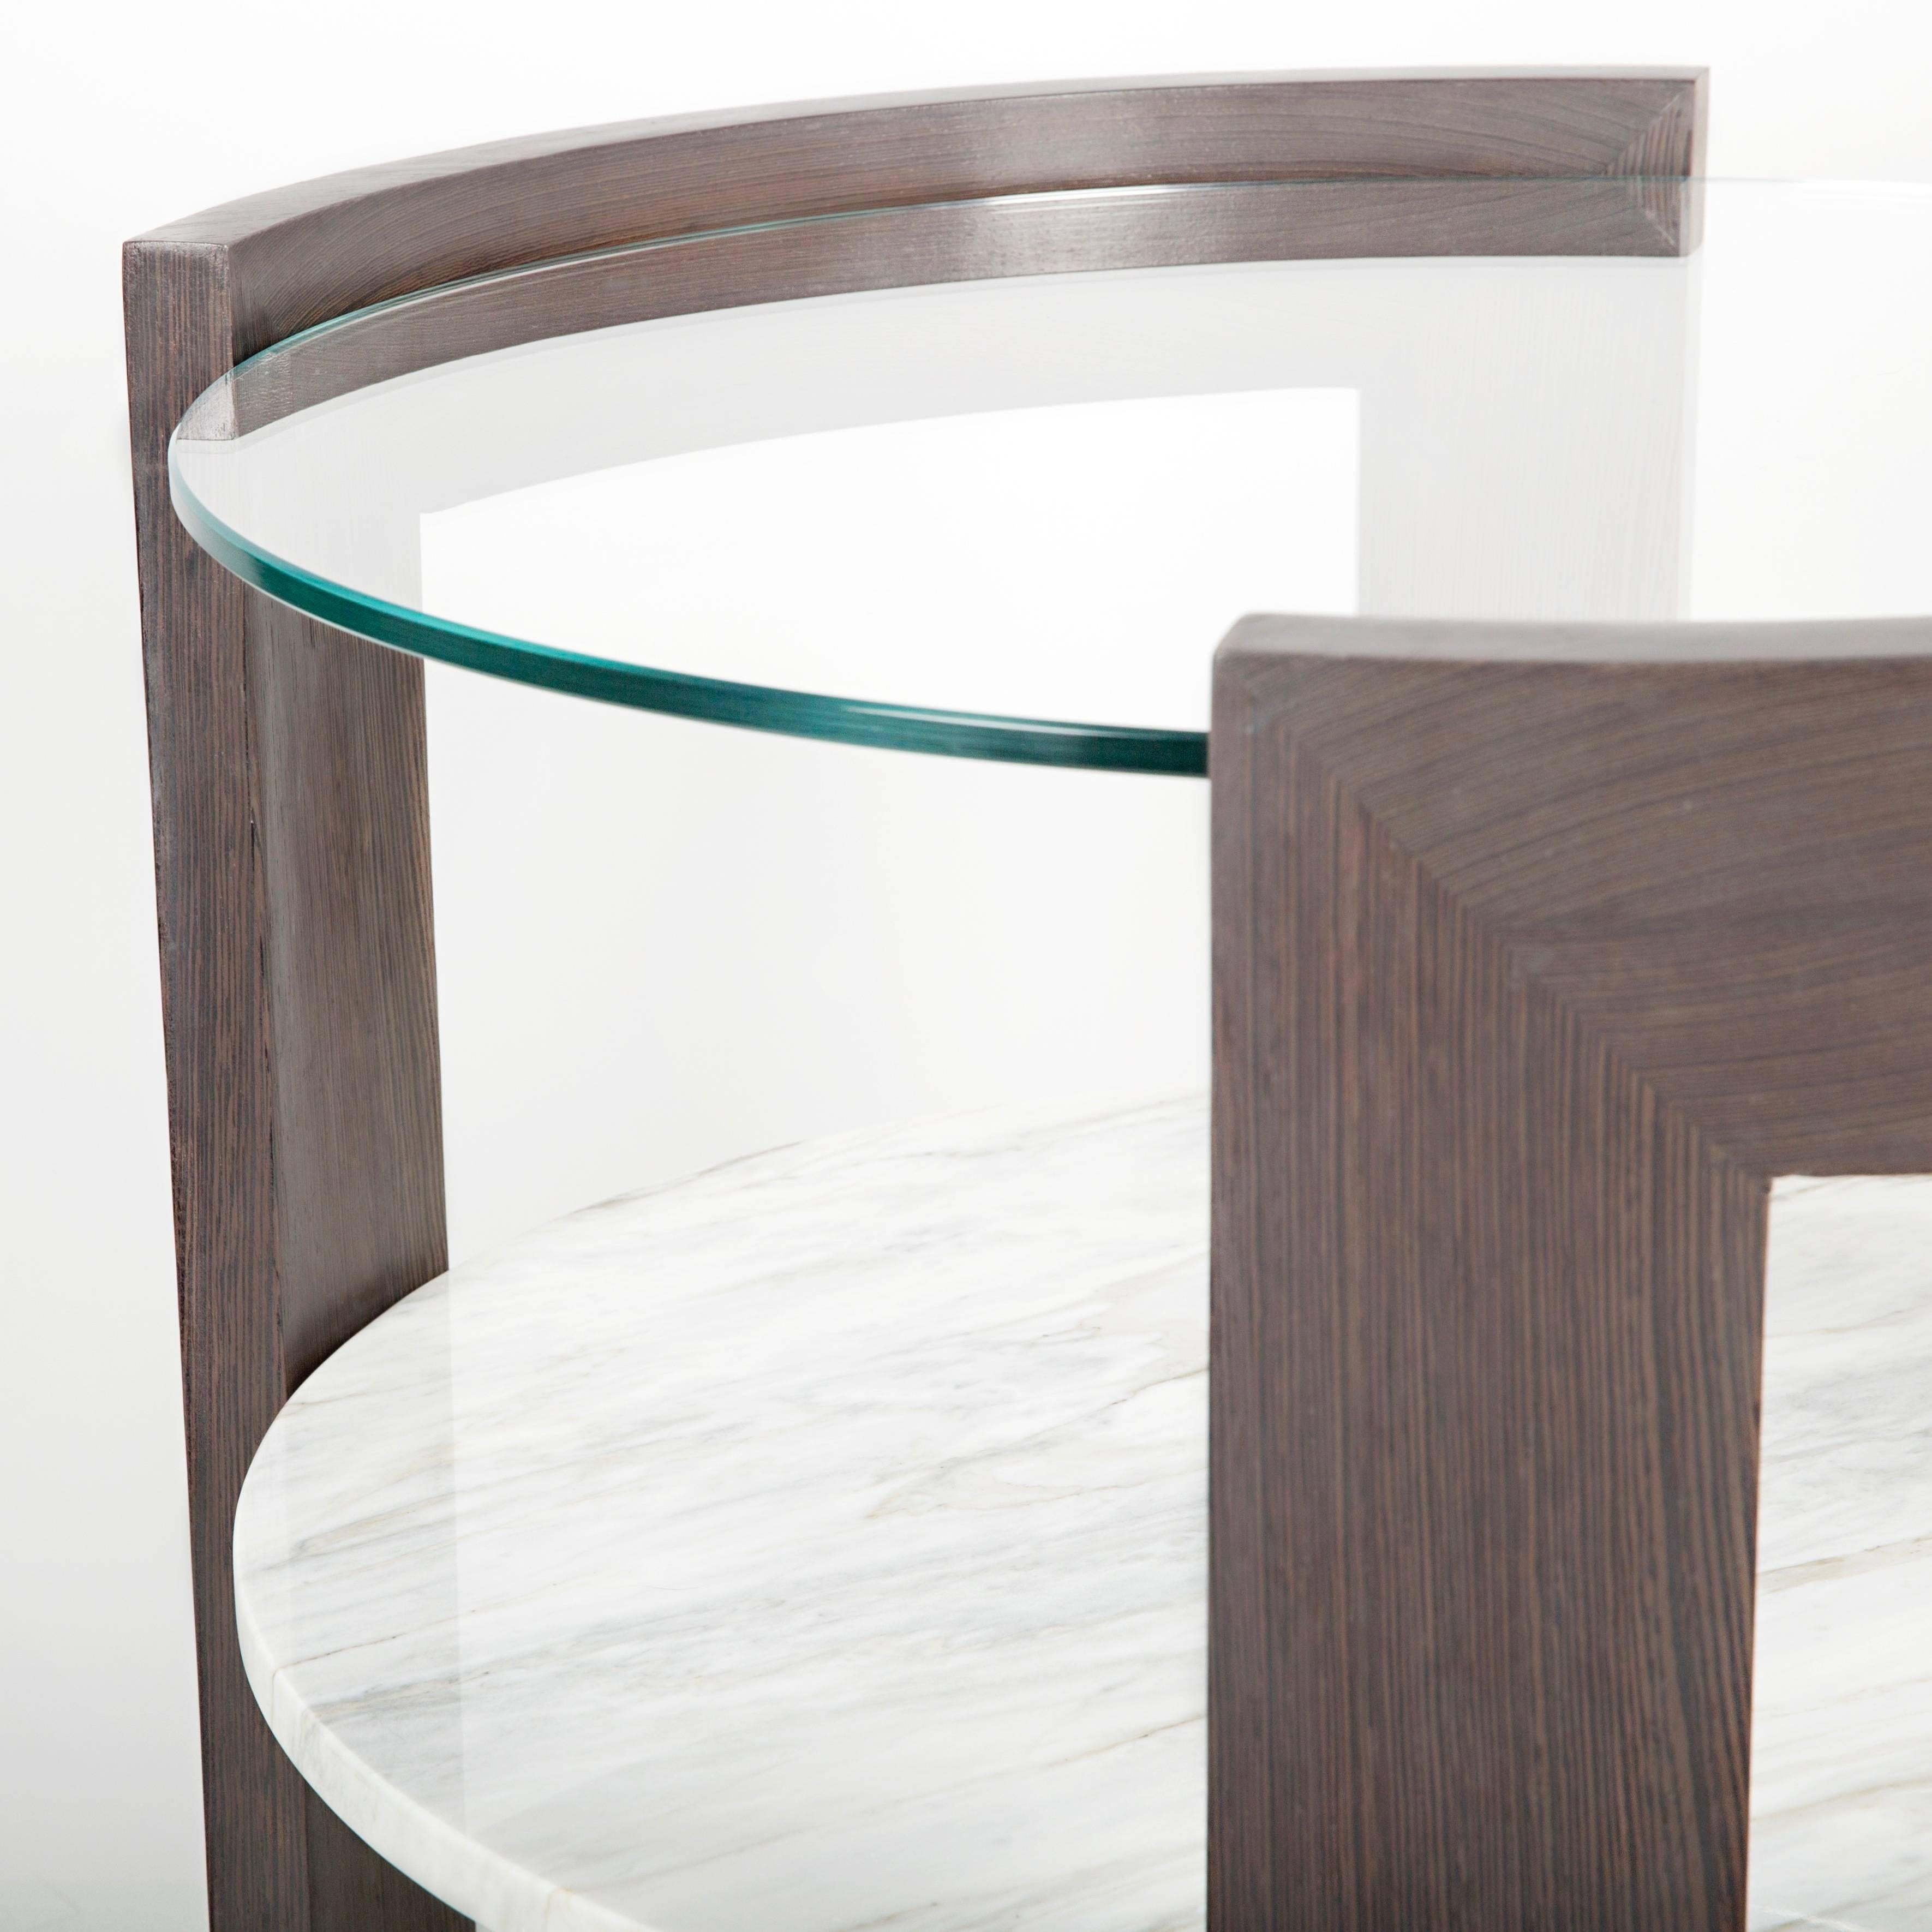 A perfectly scaled modern side table with mixed materials. Solid curved wood with unique marbles and star fire glass. Meant for the end of your sofa, between two chairs or even large enough for a nightstand. We made sure the scale of this side or